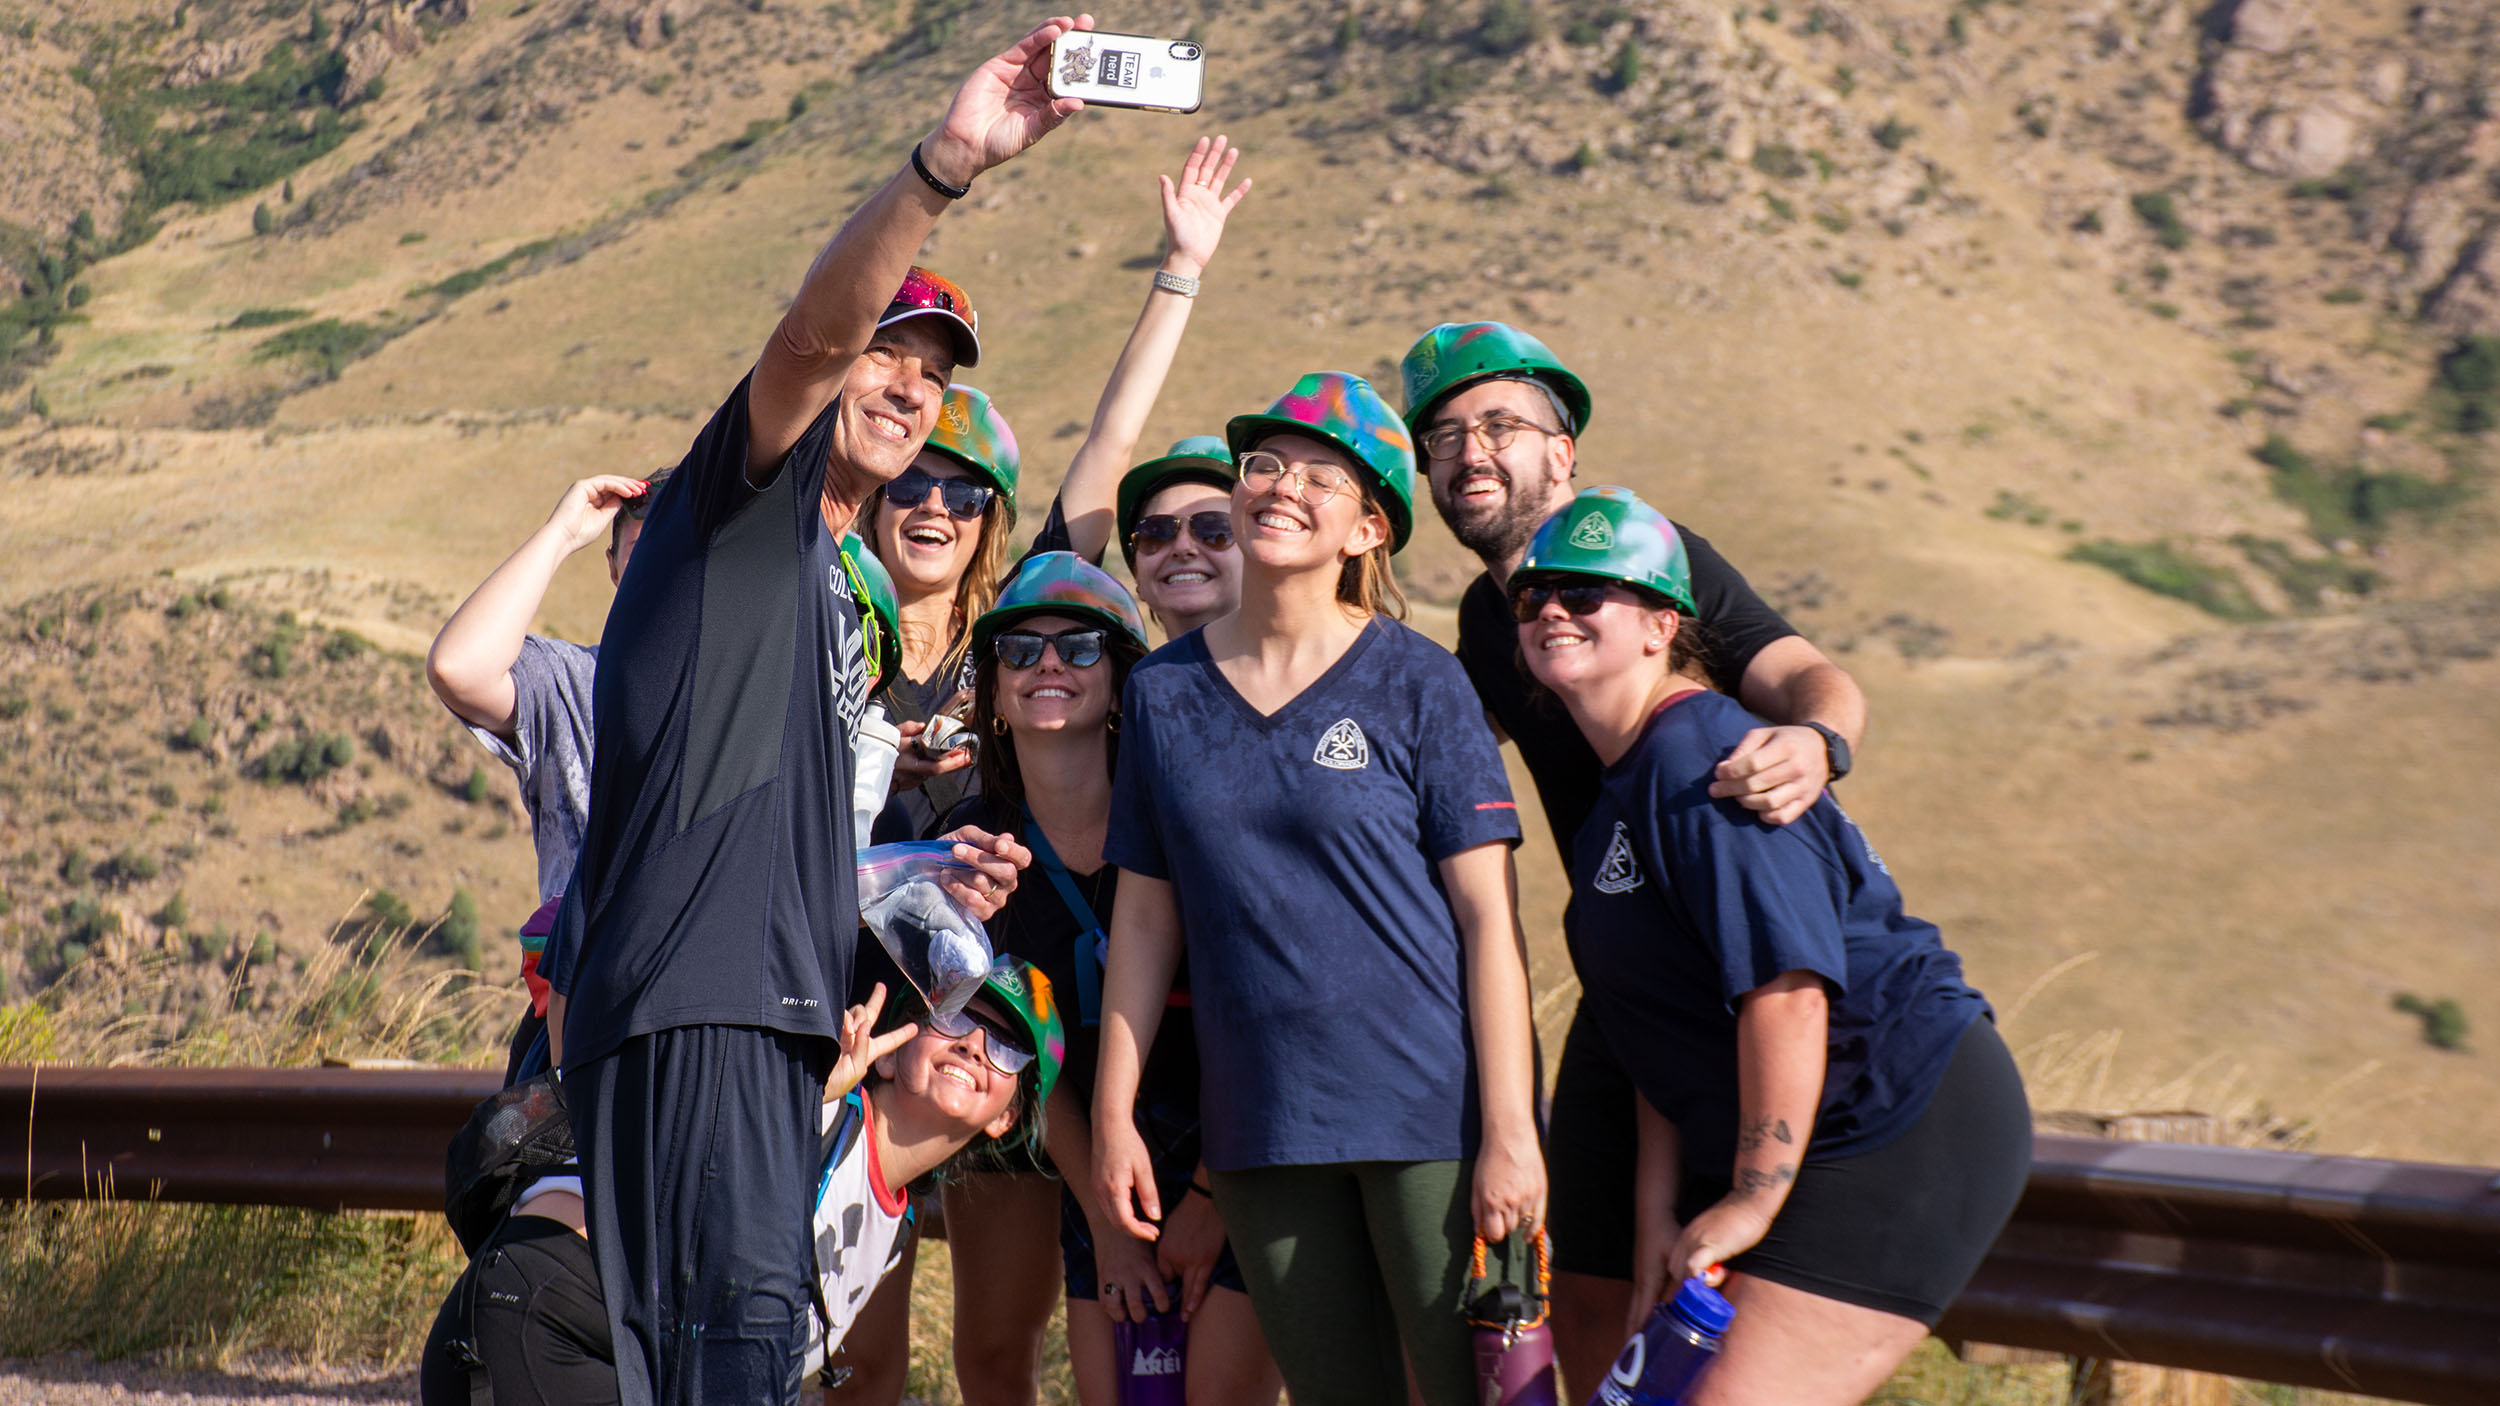 Colorado School of Mines students taking a selfie with President Johsnon for social media posting during the M Climb